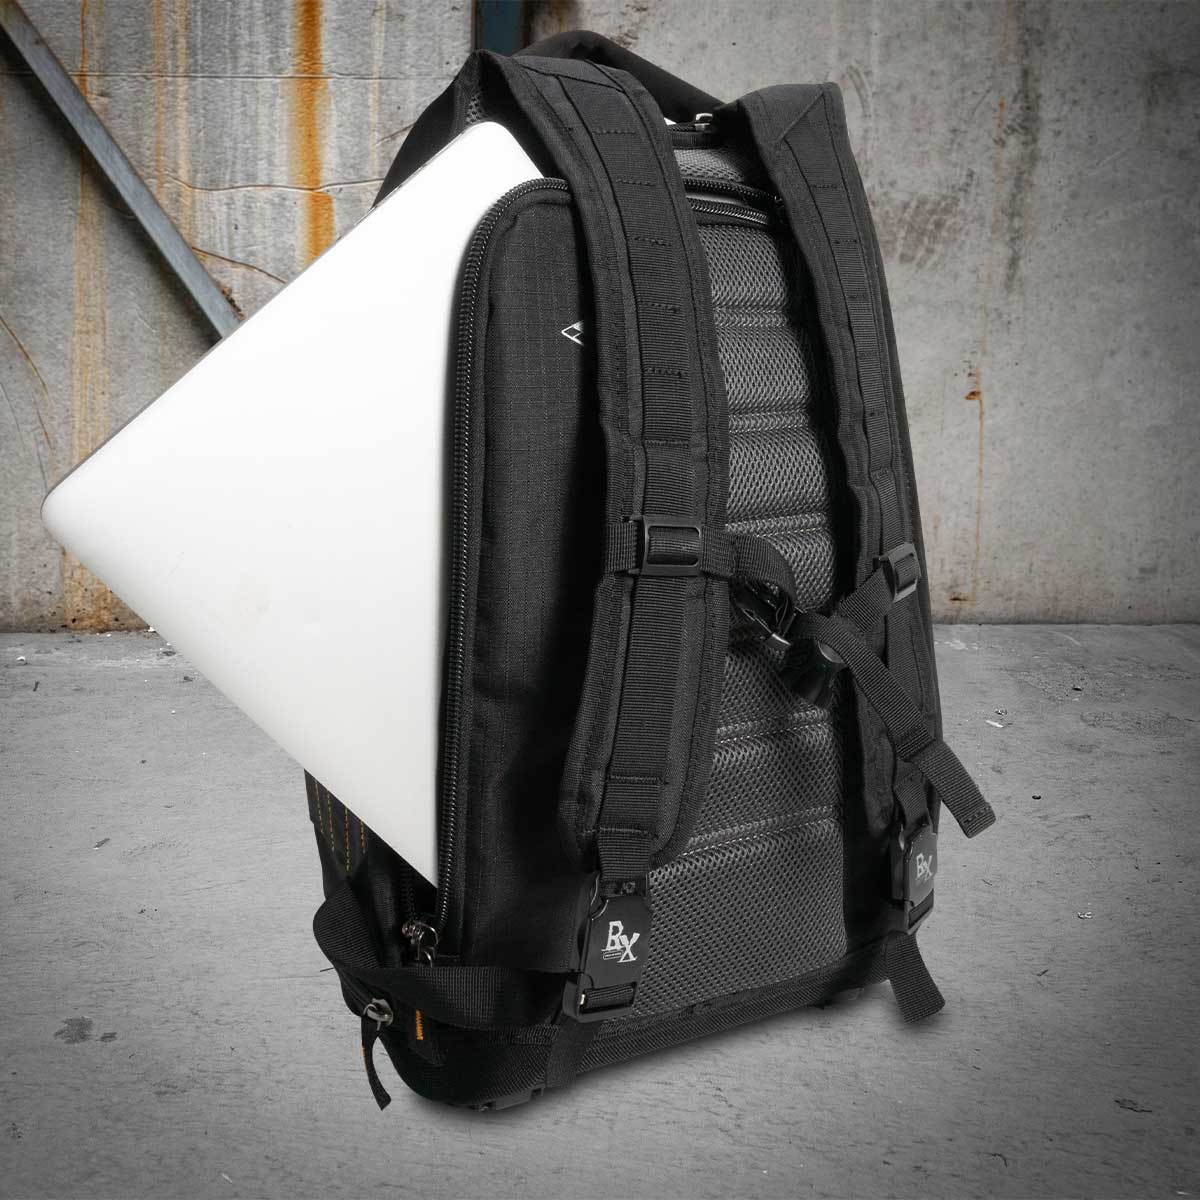 PODconnect Backpack